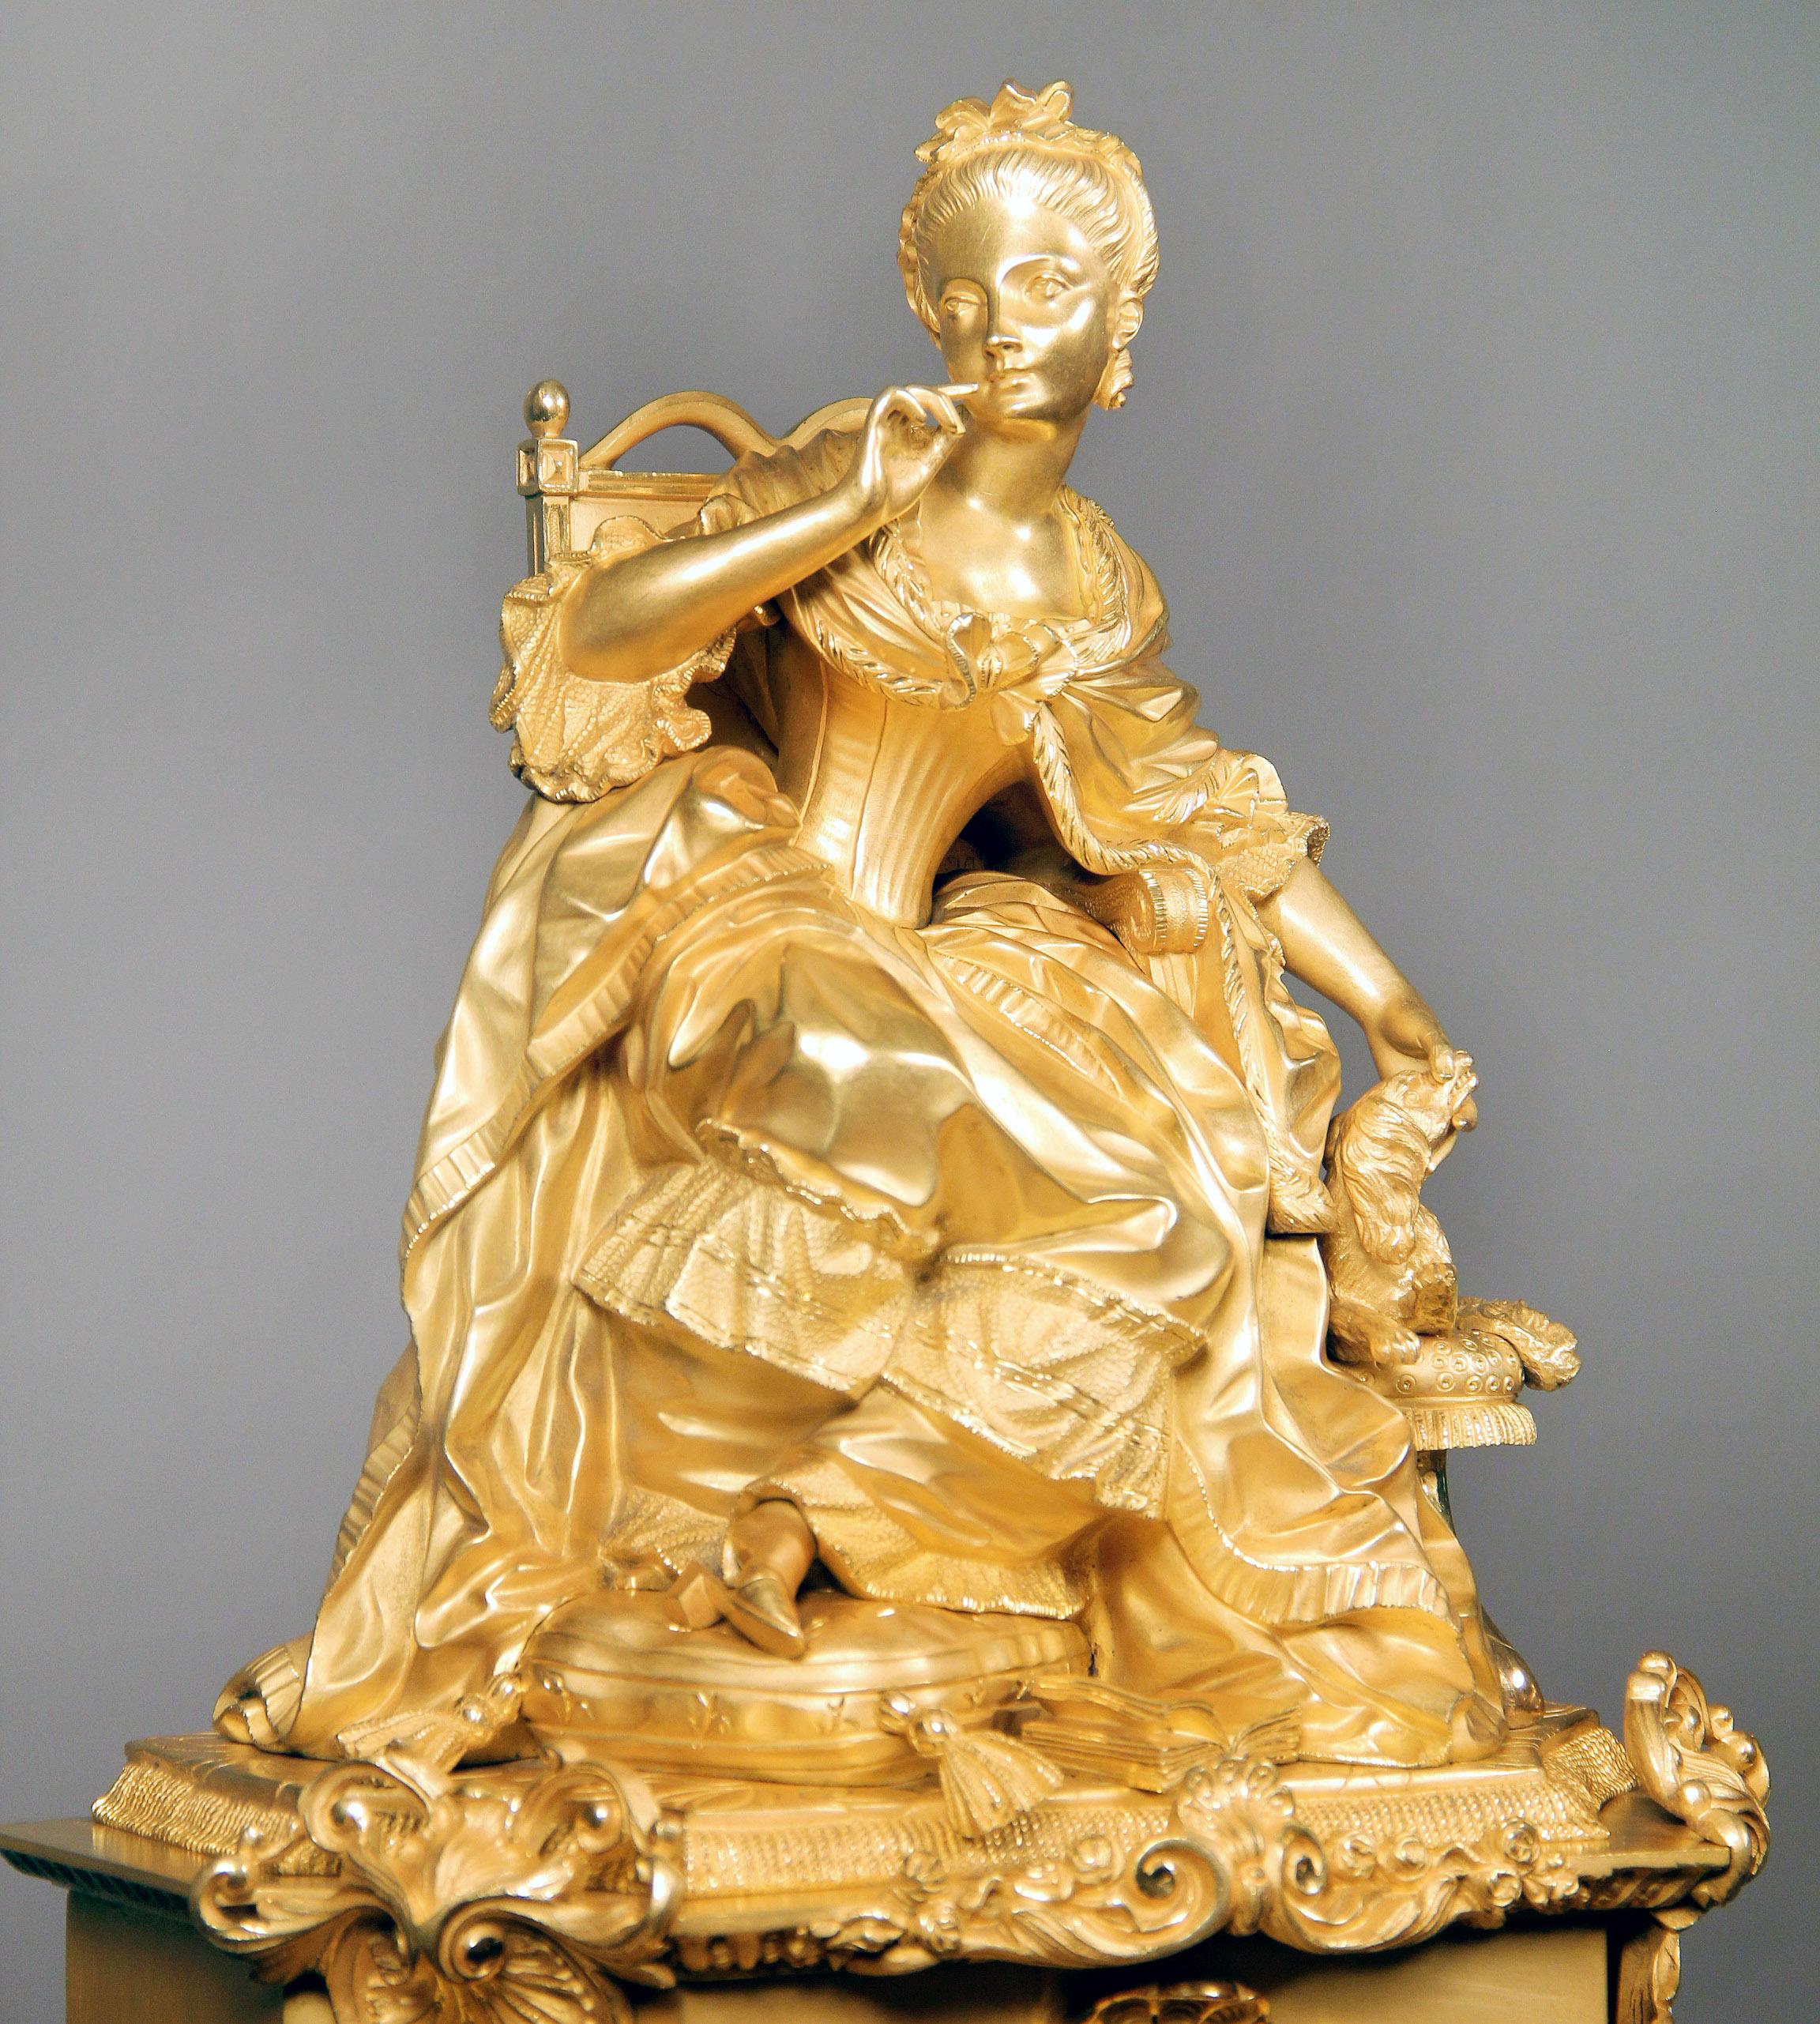 An outstanding late 19th century gilt bronze mantel (fireplace) clock by Dagrin and Philippe

By Dagrin and Philippe

A large gilt bronze, beautifully dressed sculpture of Marie Antoinette sitting with her dog on top of an intricately designed